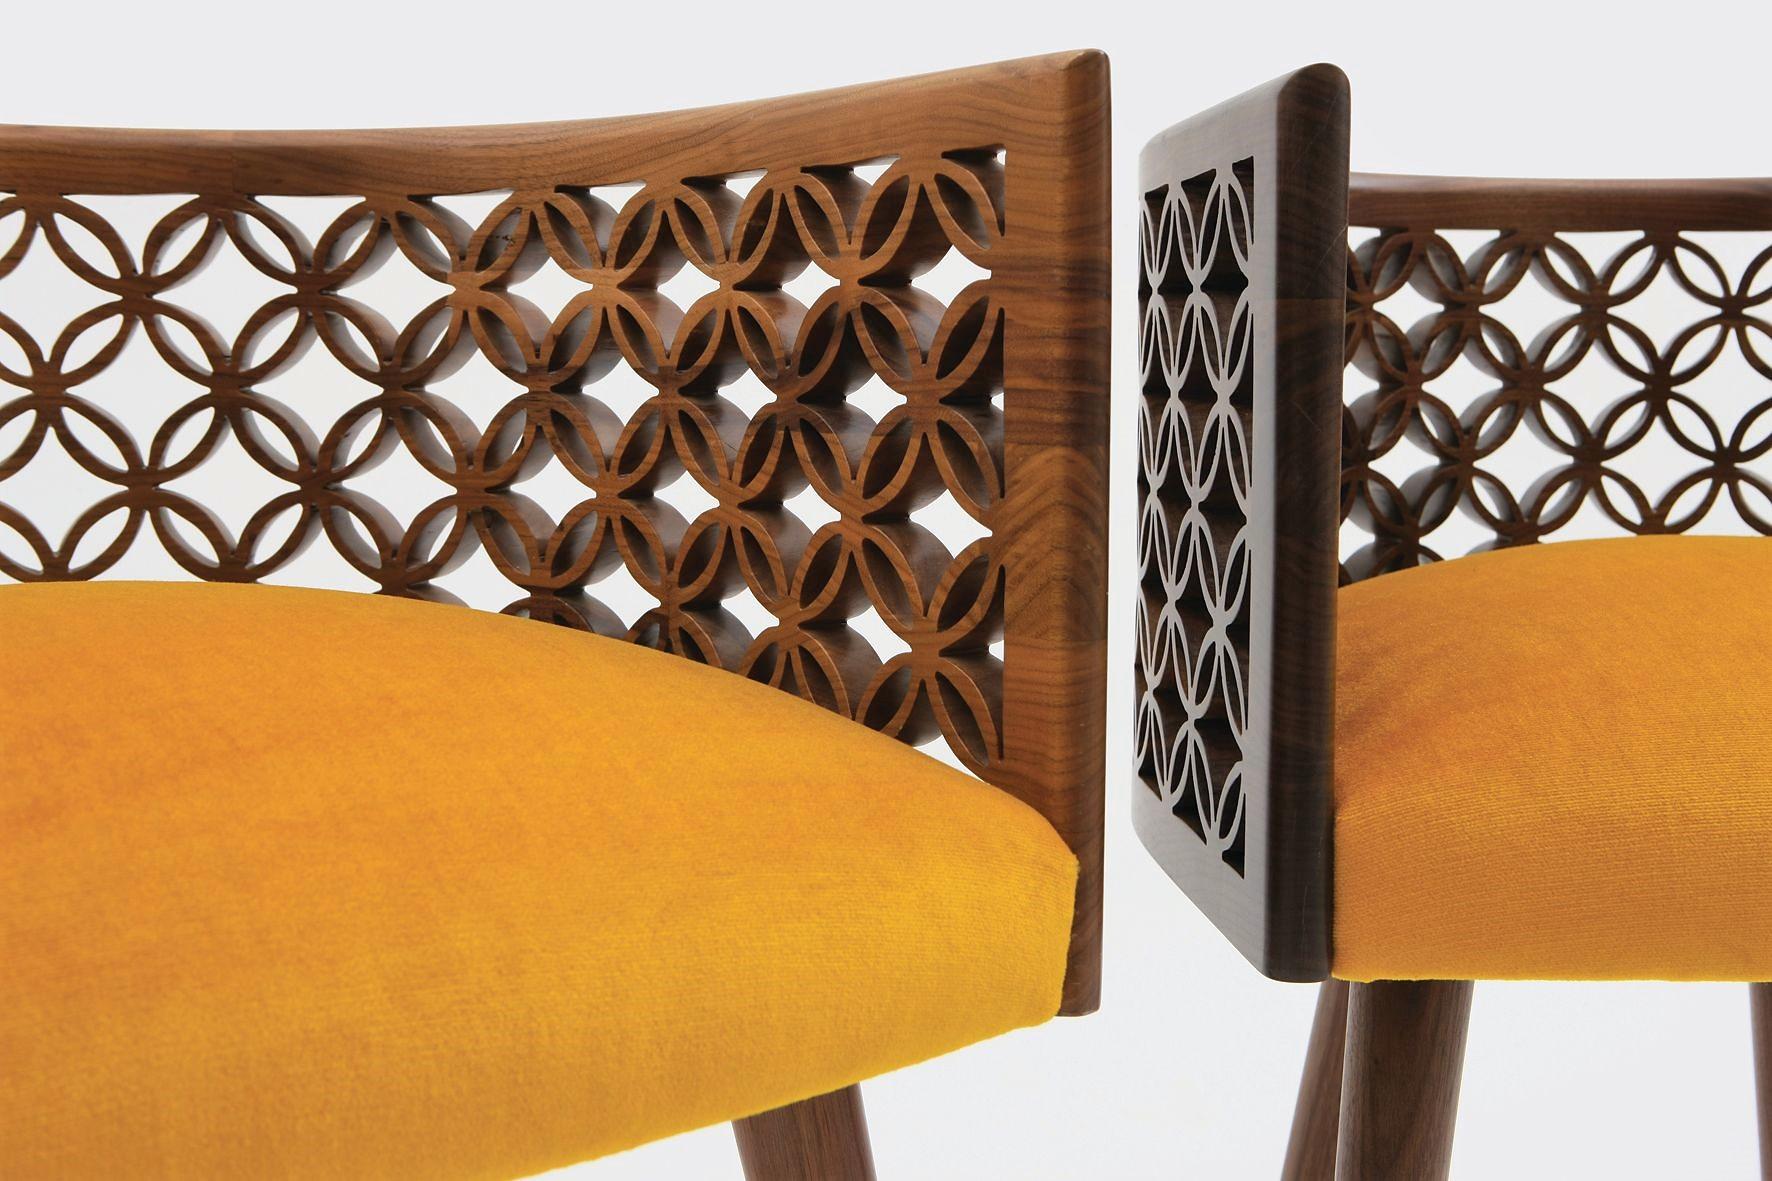 Nada Debs seating collection is reminiscent of mid-century design that marries modern form with exquisite craftsmanship. The Arabesque motif is finished in American walnut color. See photo for other velvet upholstery color options. 
The chair frame